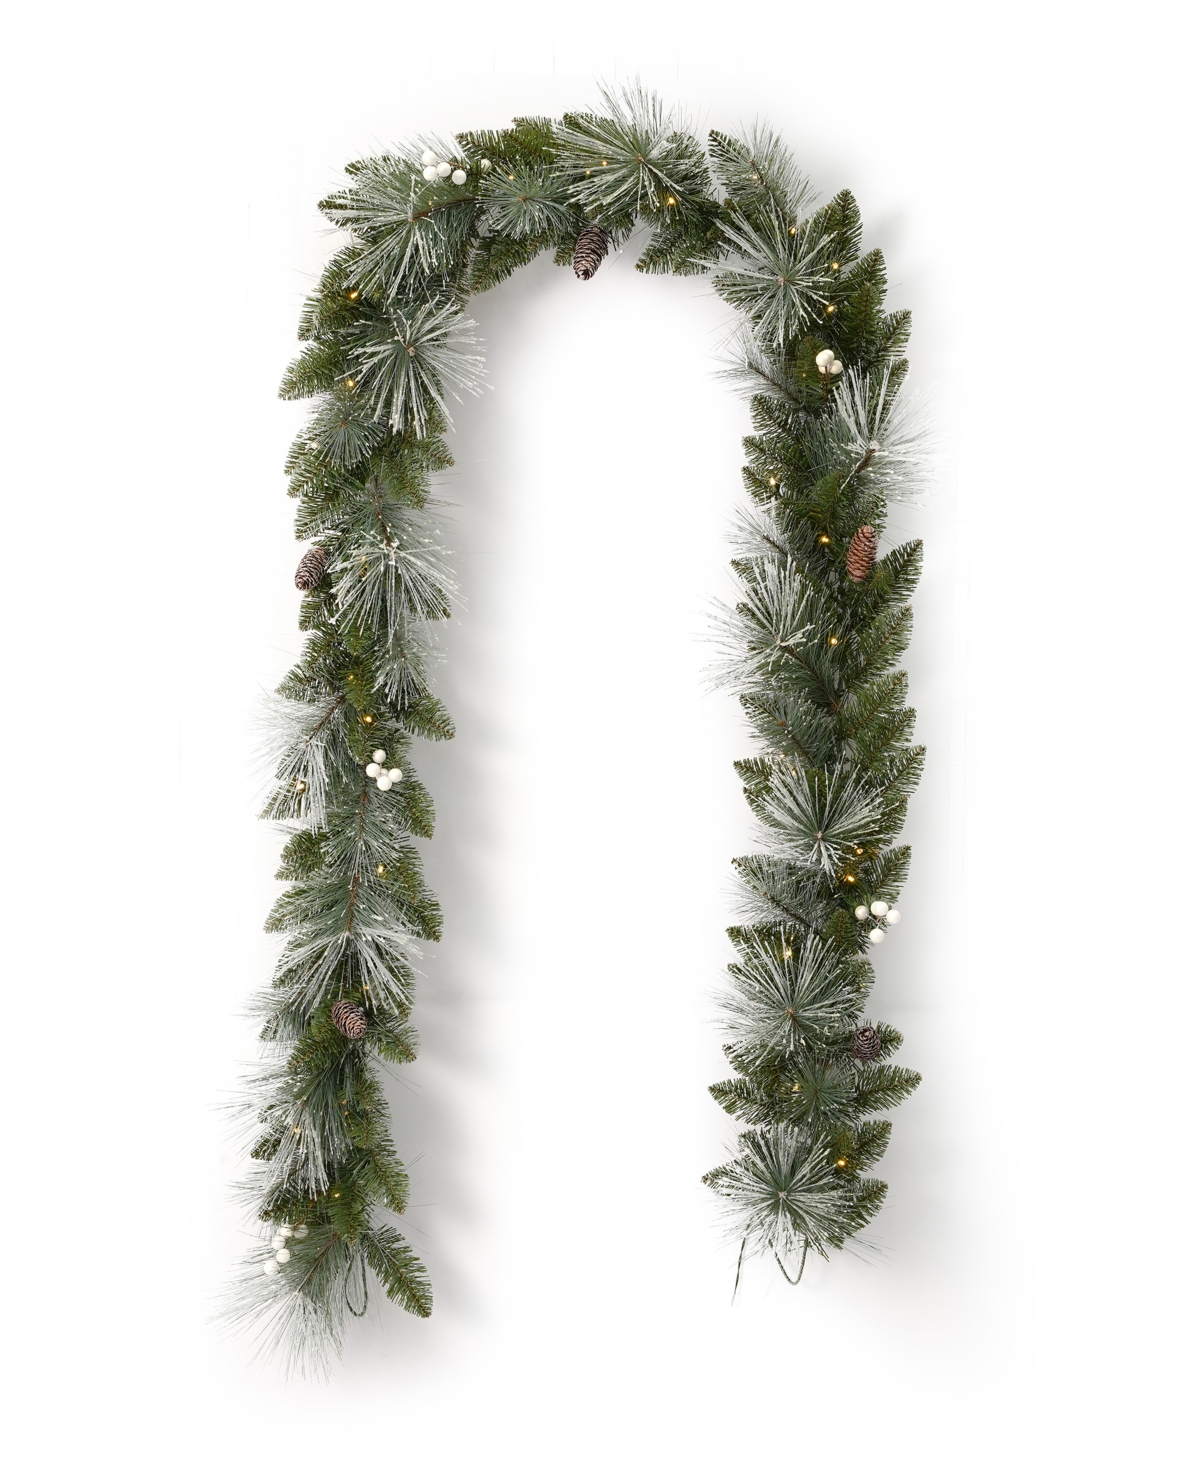 Glistening Mountain Pine 9' Pre-Lit Pine Needle Mixed Pvc Garland with Pinecones, Berries, 152 Tips, 50 Warm Led Lights with Battery Operated